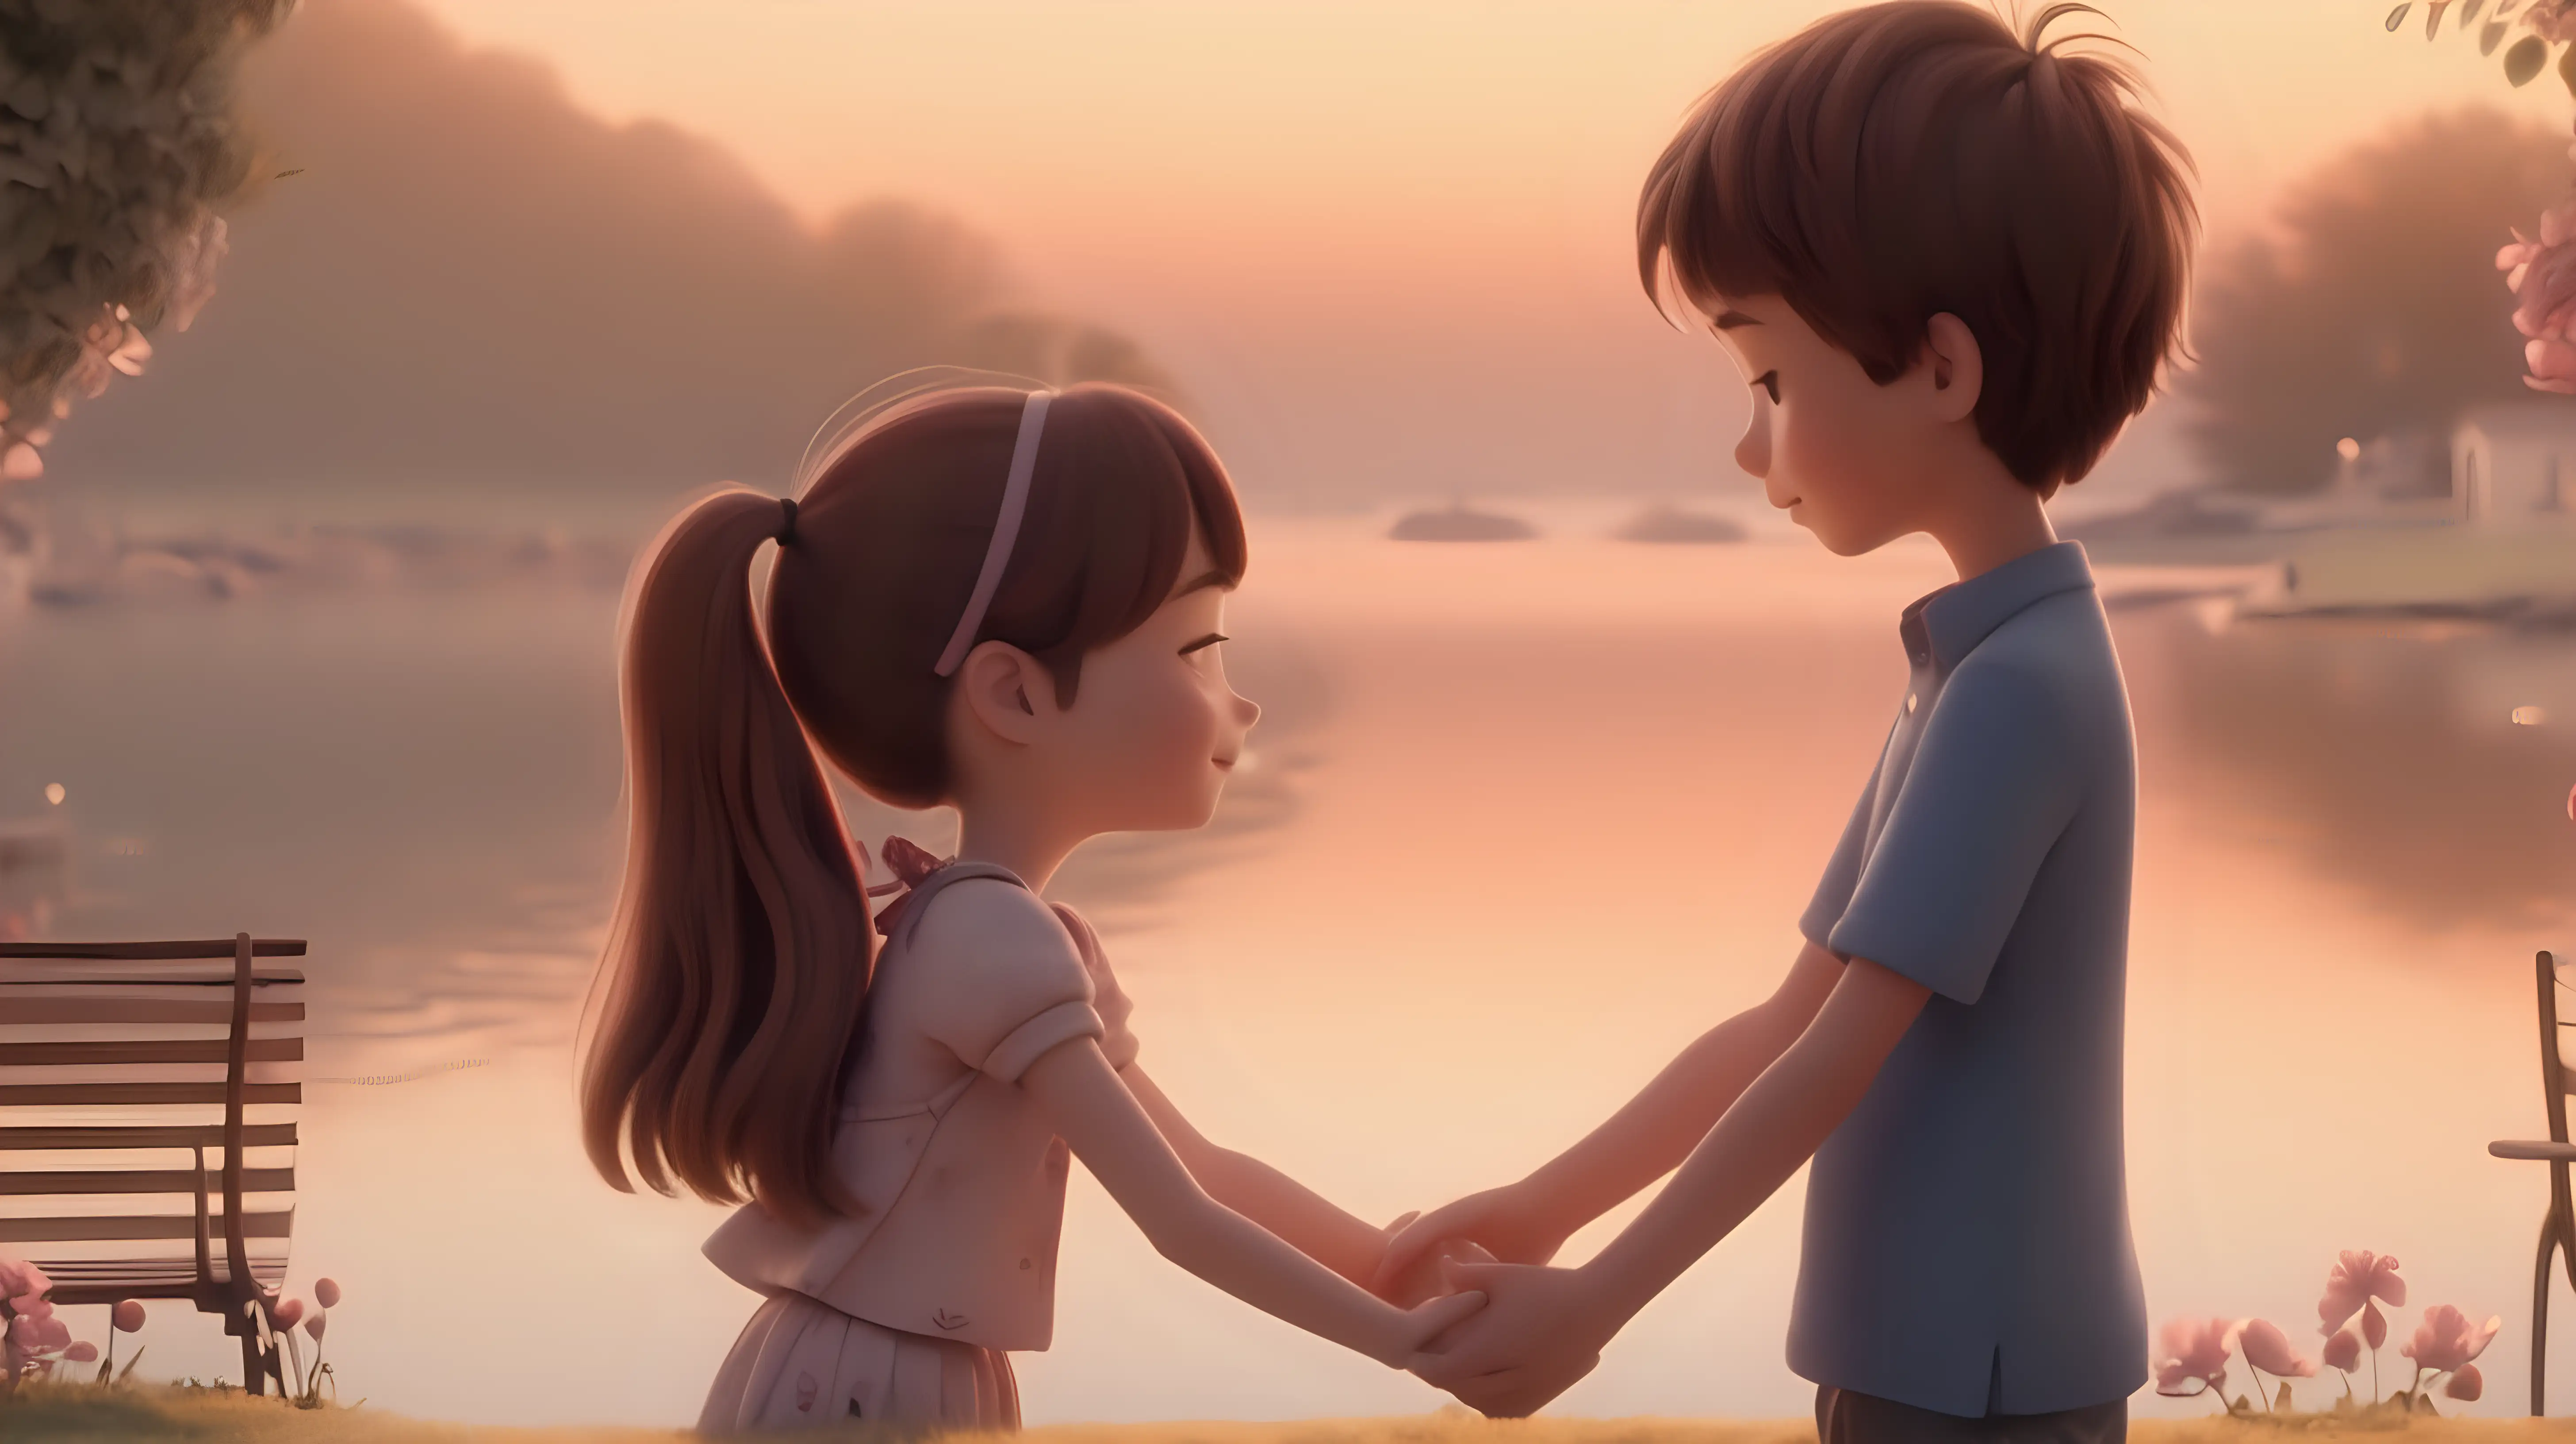 A delightful and romantic animation featuring a boy and girl exchanging soft hugs in a beautiful, serene setting.